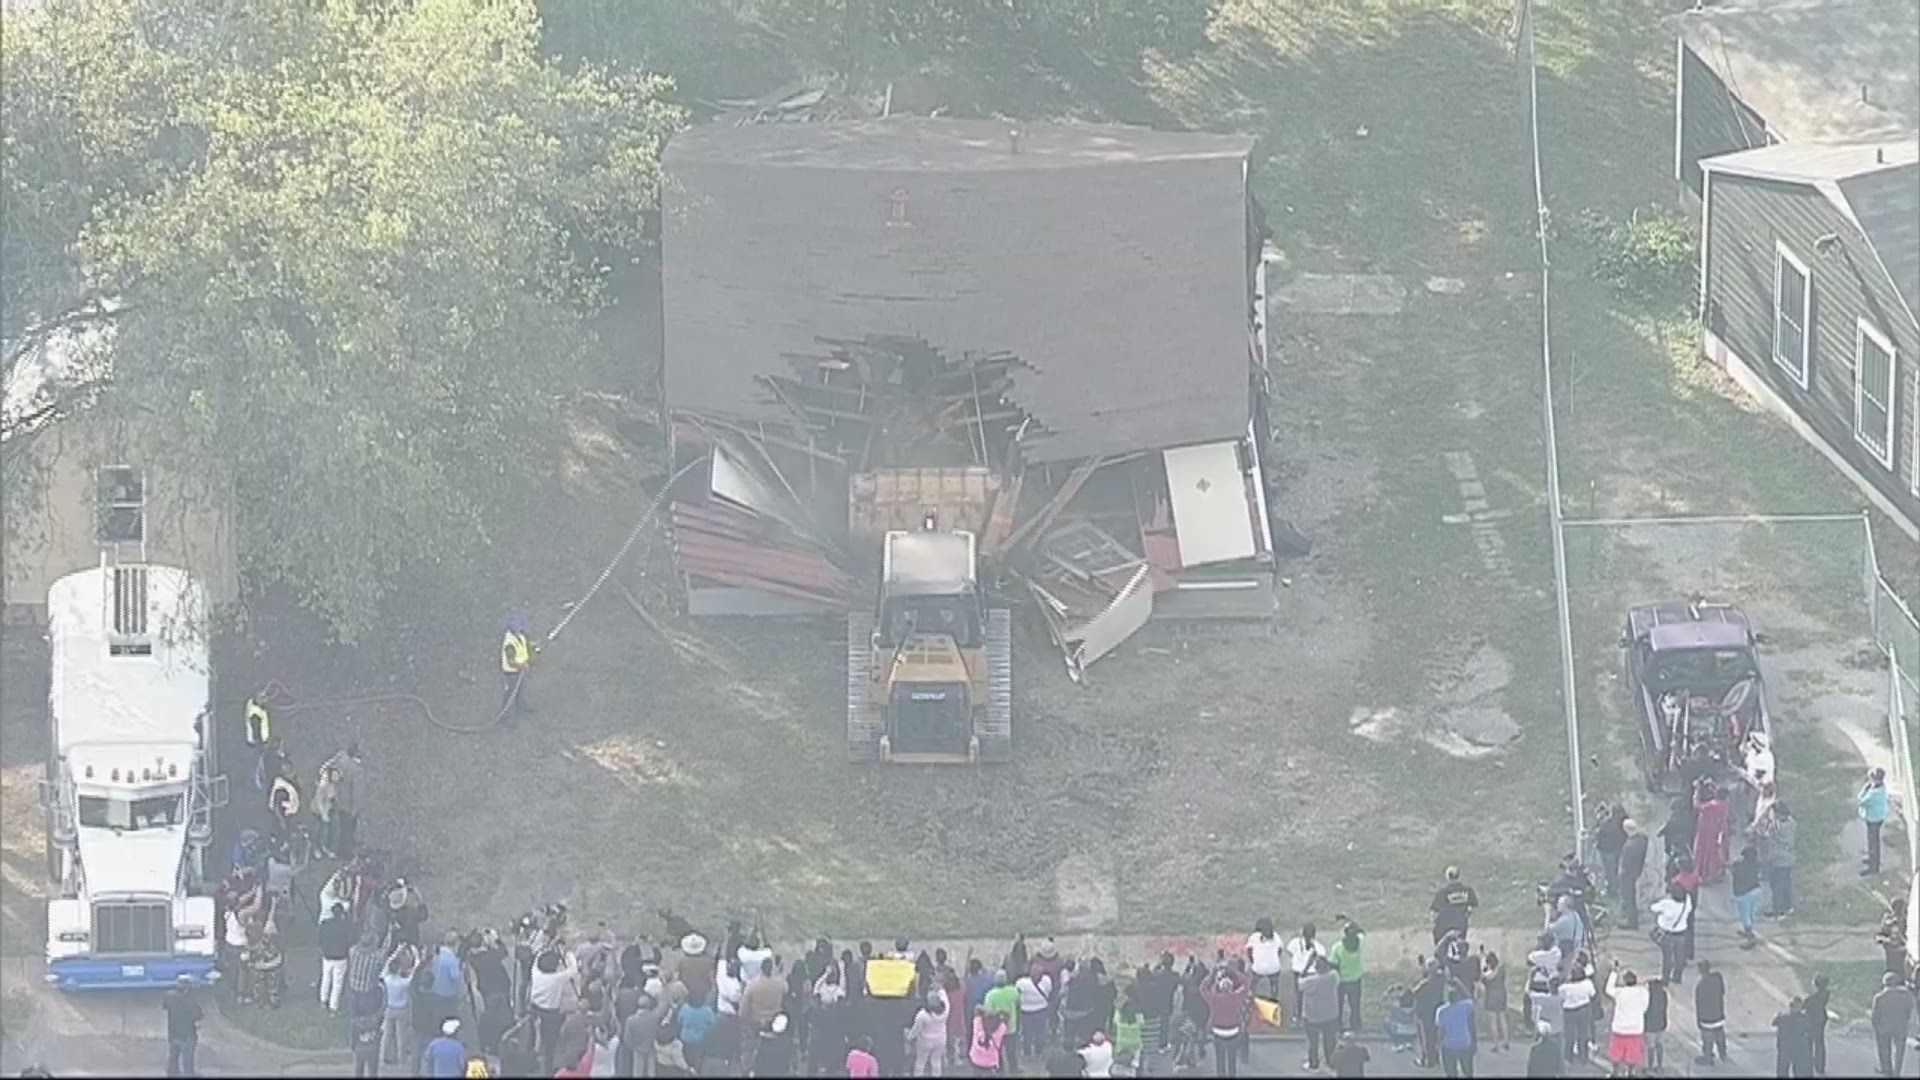 Crews demolished the home where 13-year-old Shavon Randle was found dead in August after being taken for drug ransom.